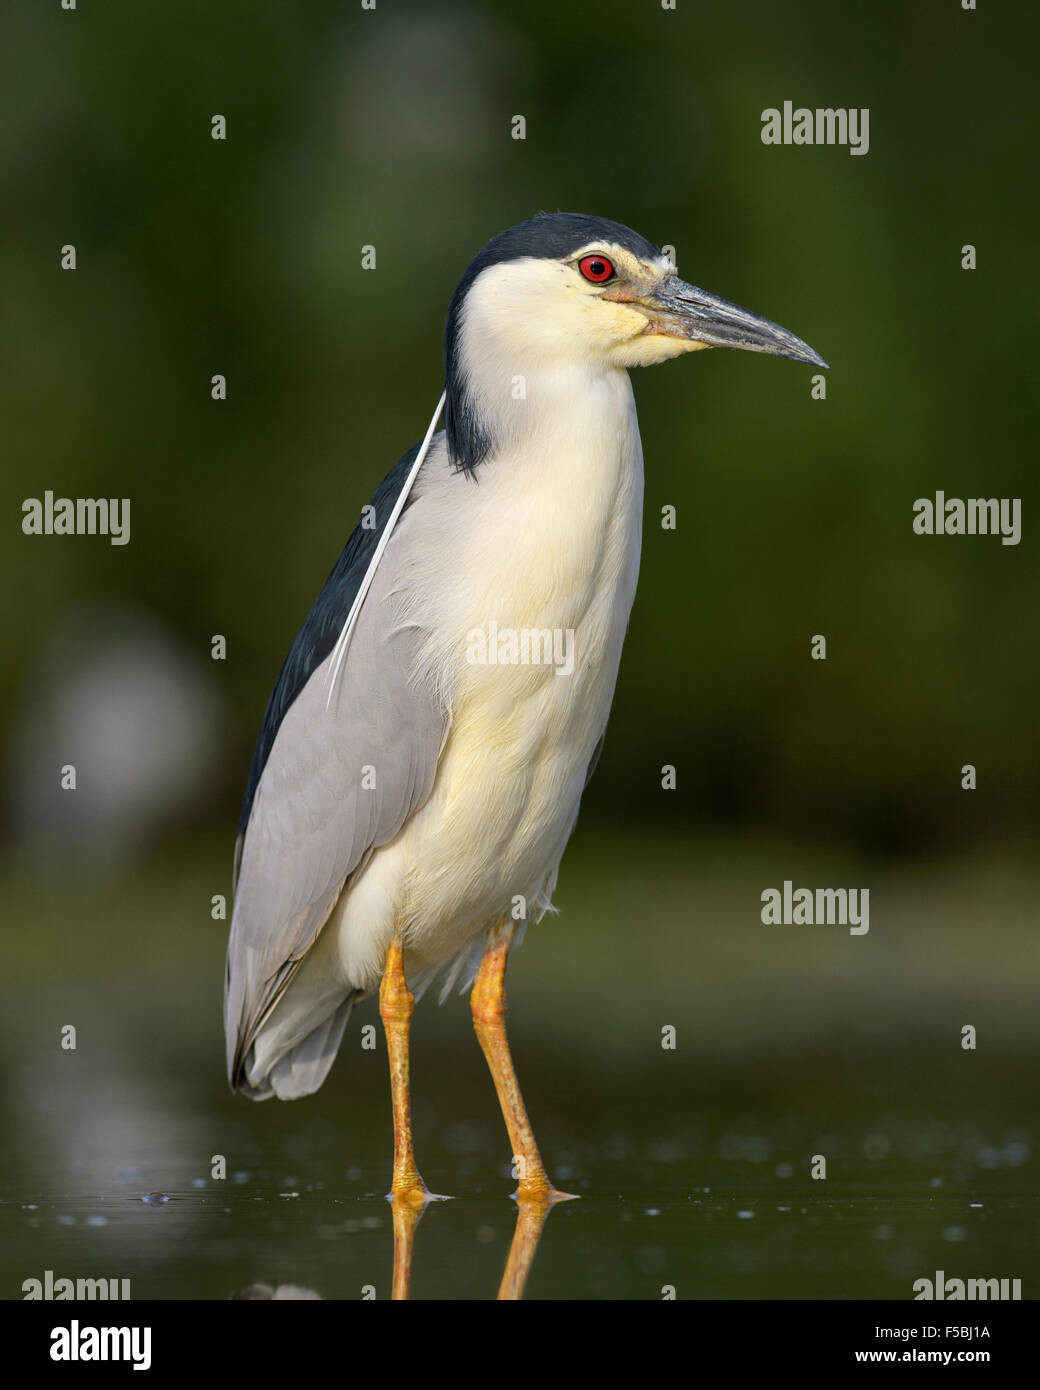 Black-crowned night heron (Nycticorax nycticorax), adult standing in shallow fishpond water, Kiskunság National Park, Hungary Stock Photo